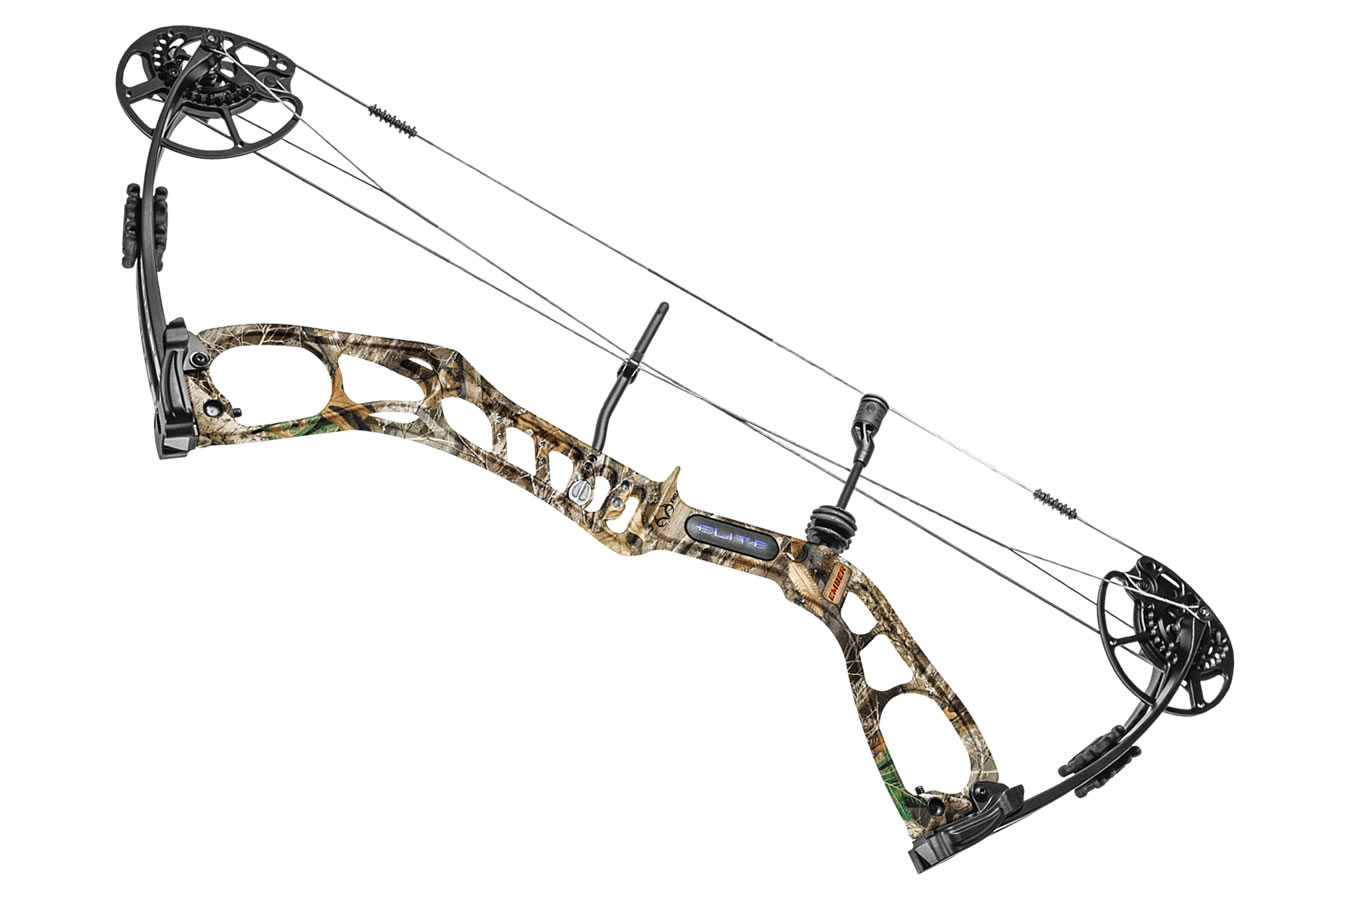 Elite Archery Ember Compound Bow, Adjustable Draw Weight / Length